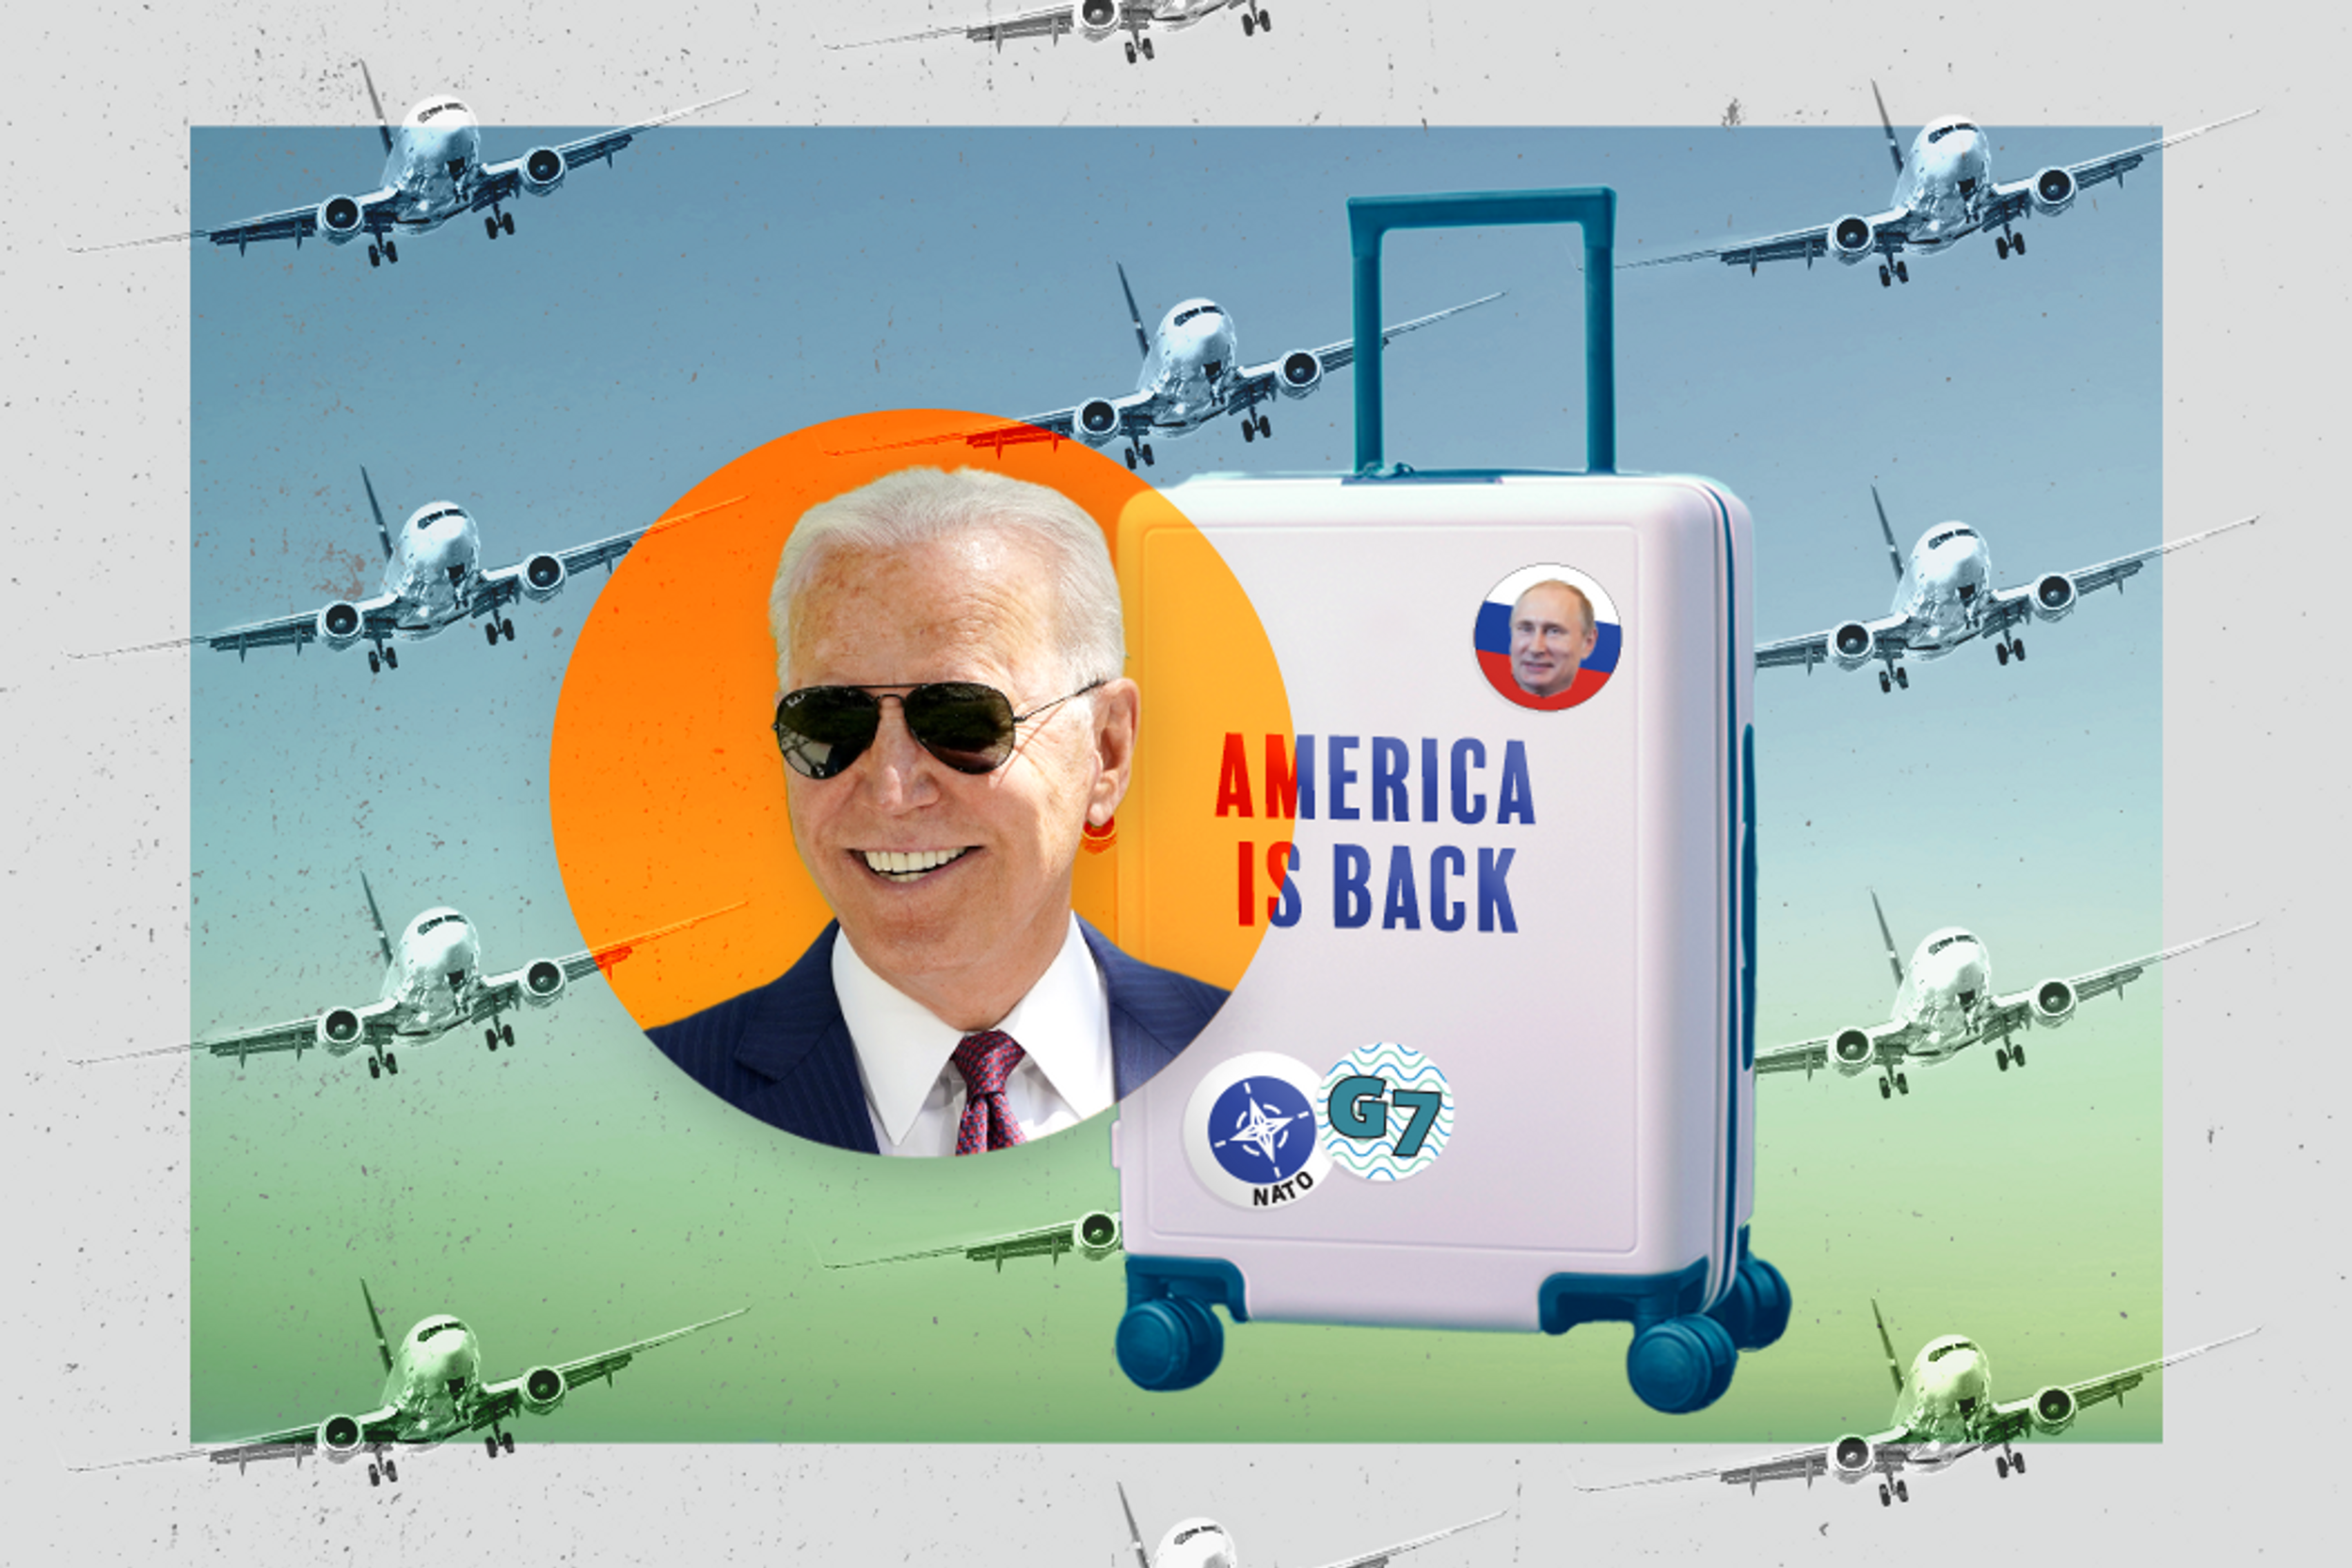 Biden goes to Europe, but is America really “back”?